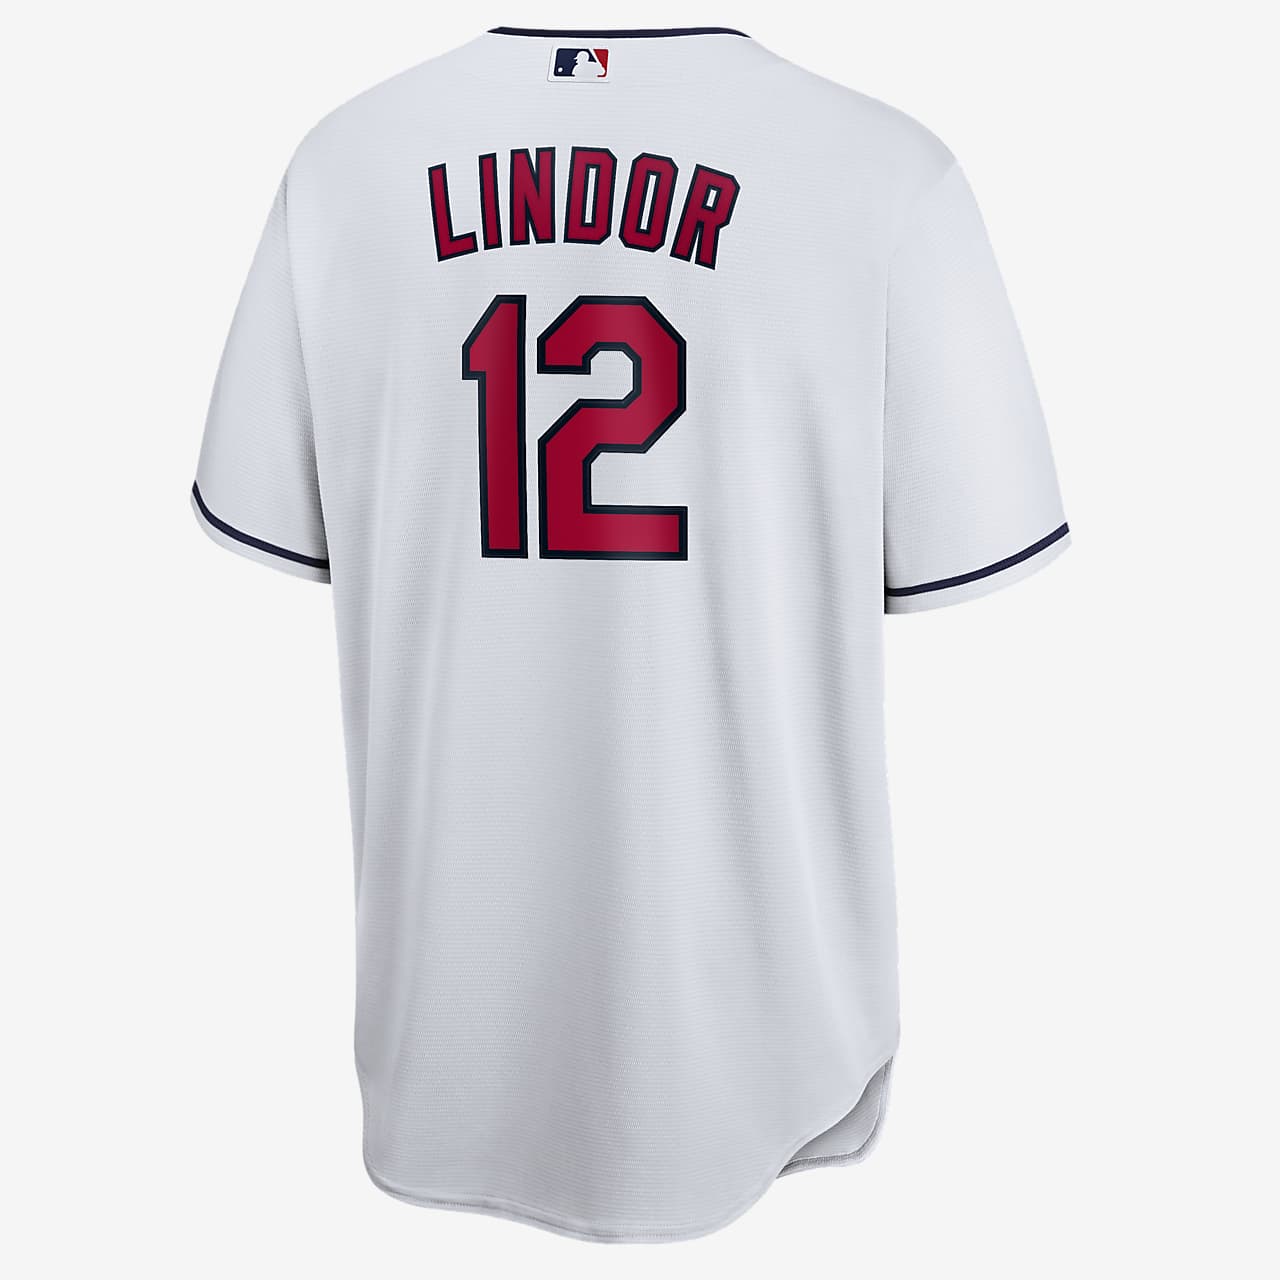 mlb indians jersey